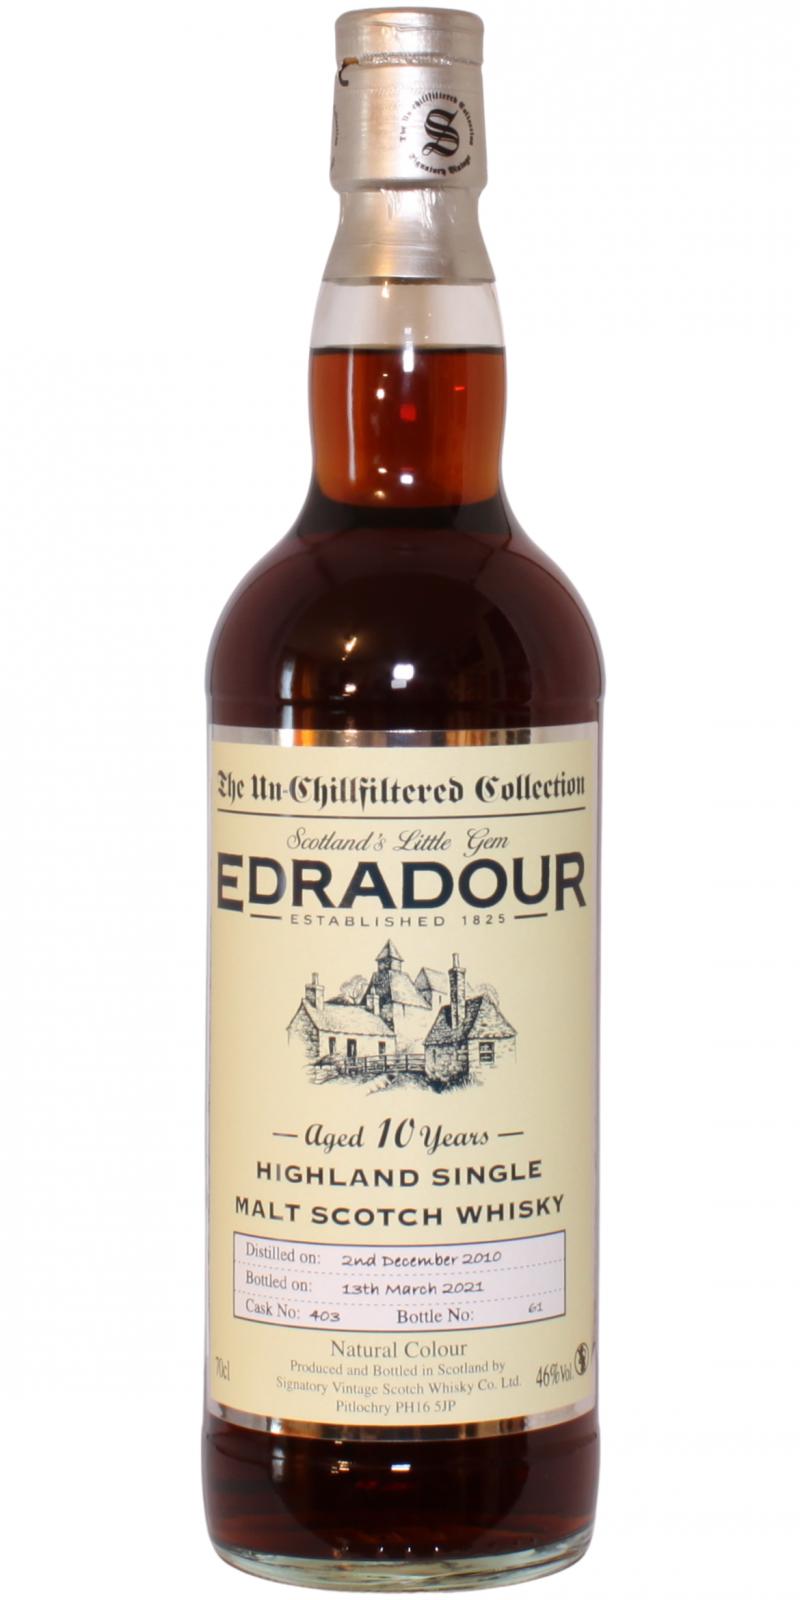 Edradour 2010 SV The Un-Chillfiltered Collection Sherry Cask #403 46% 700ml